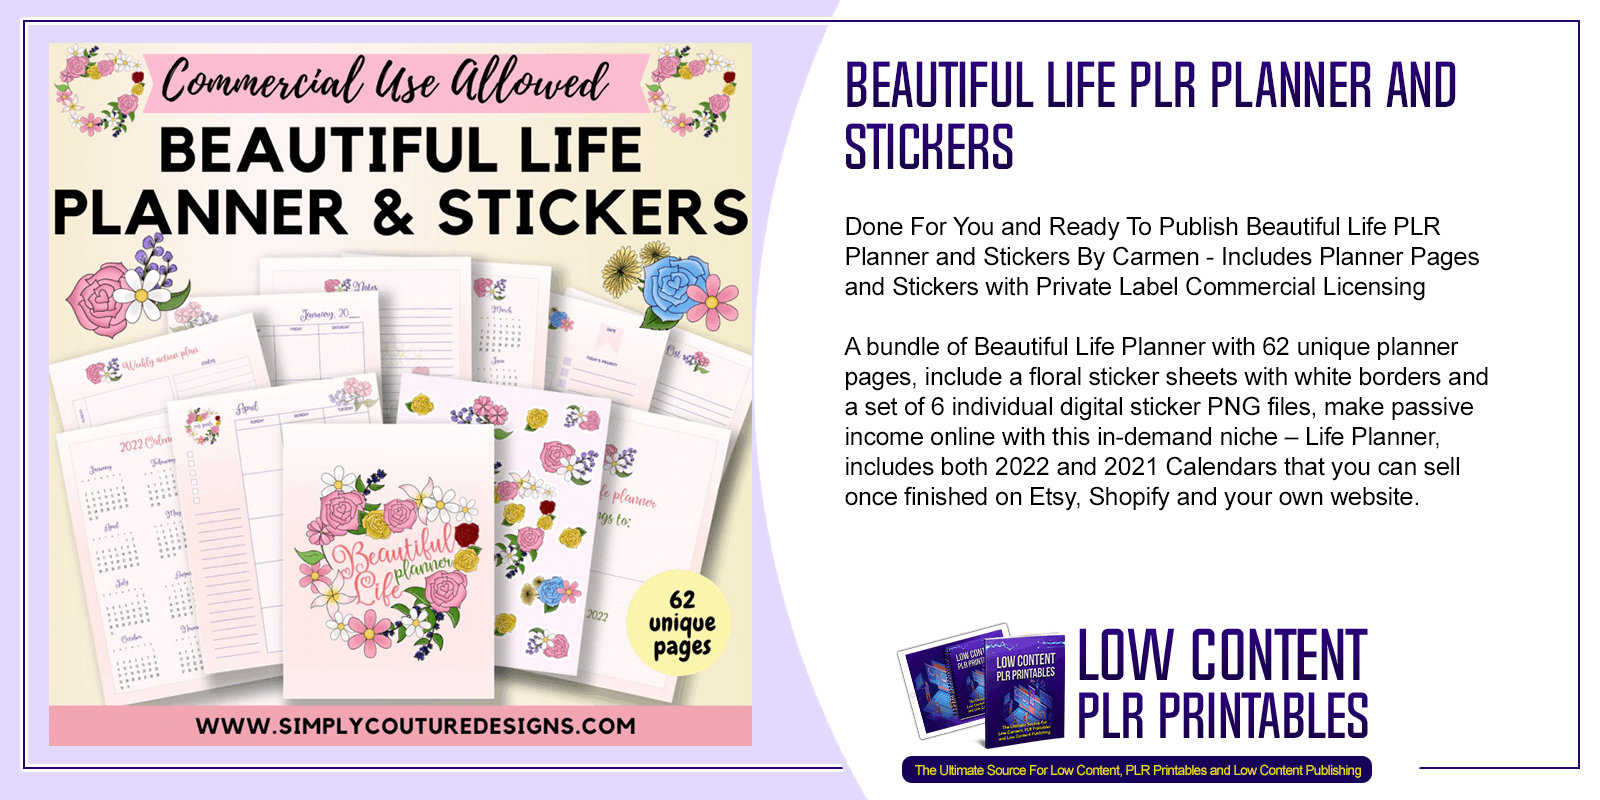 Beautiful Life PLR Planner and Stickers